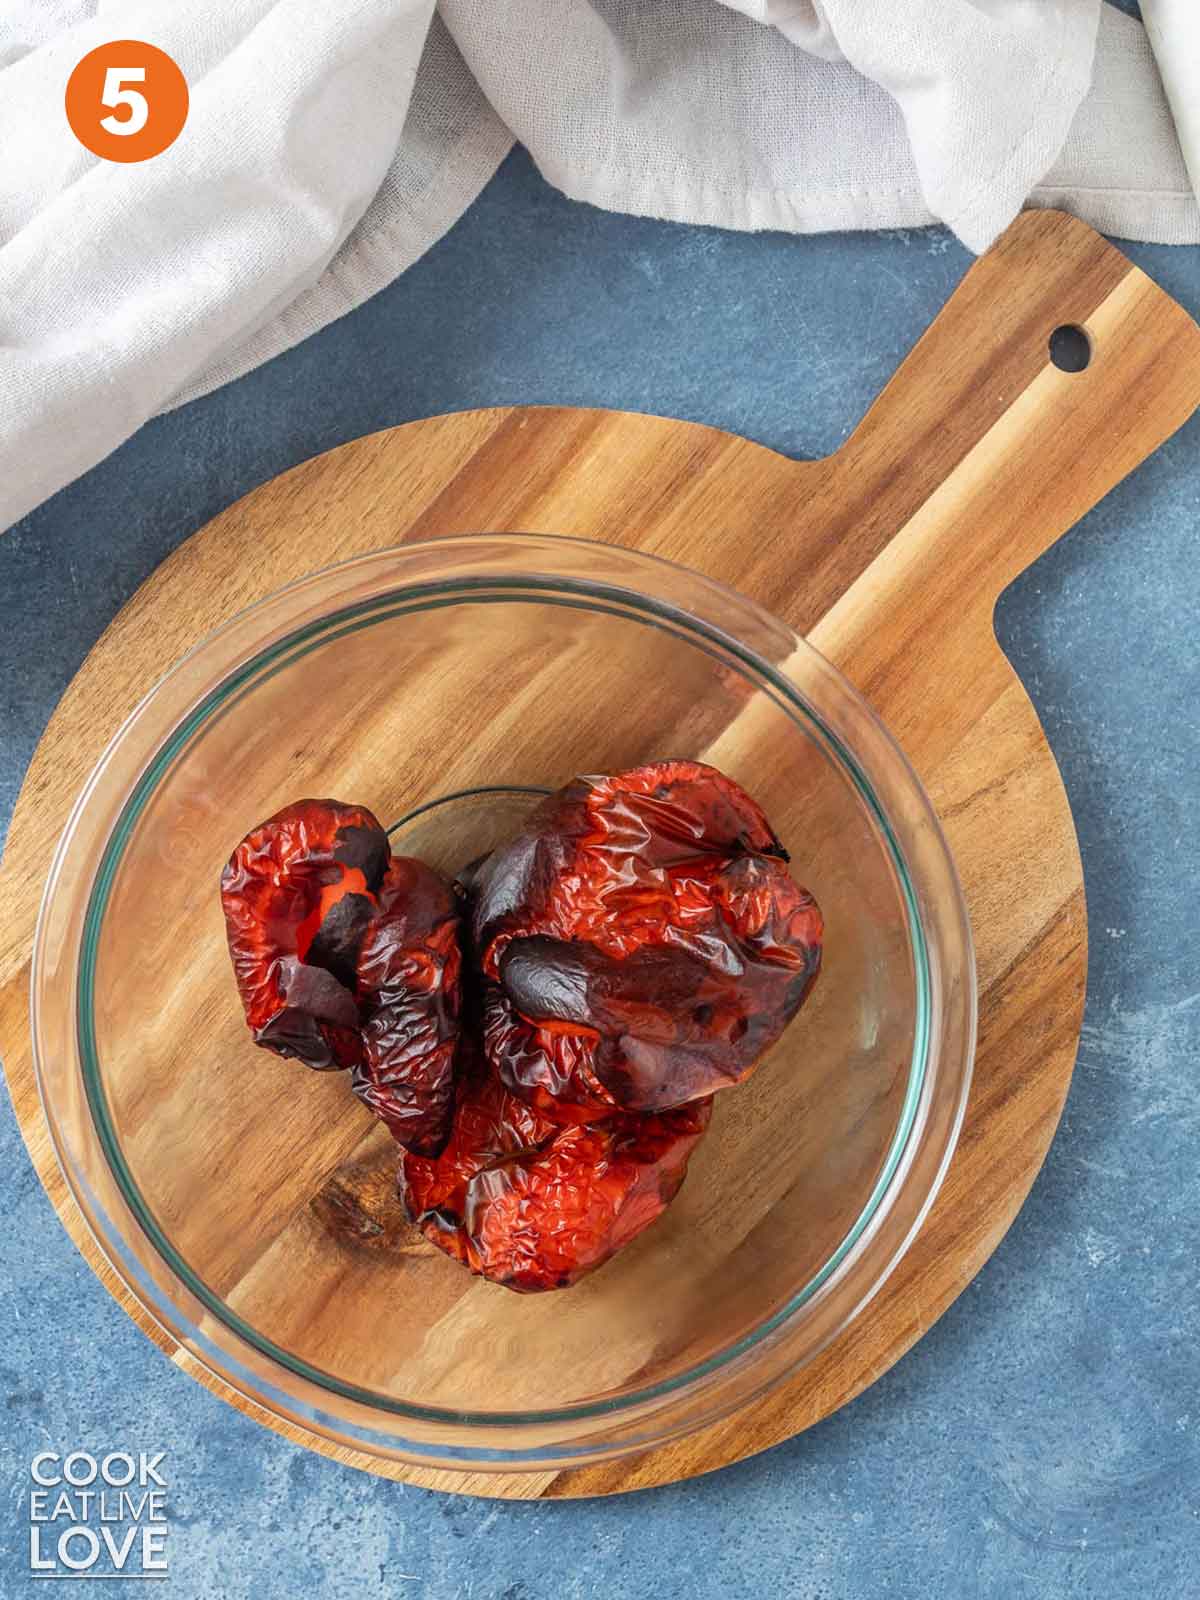 Roasted red peppers in a glass bowl after cooking.